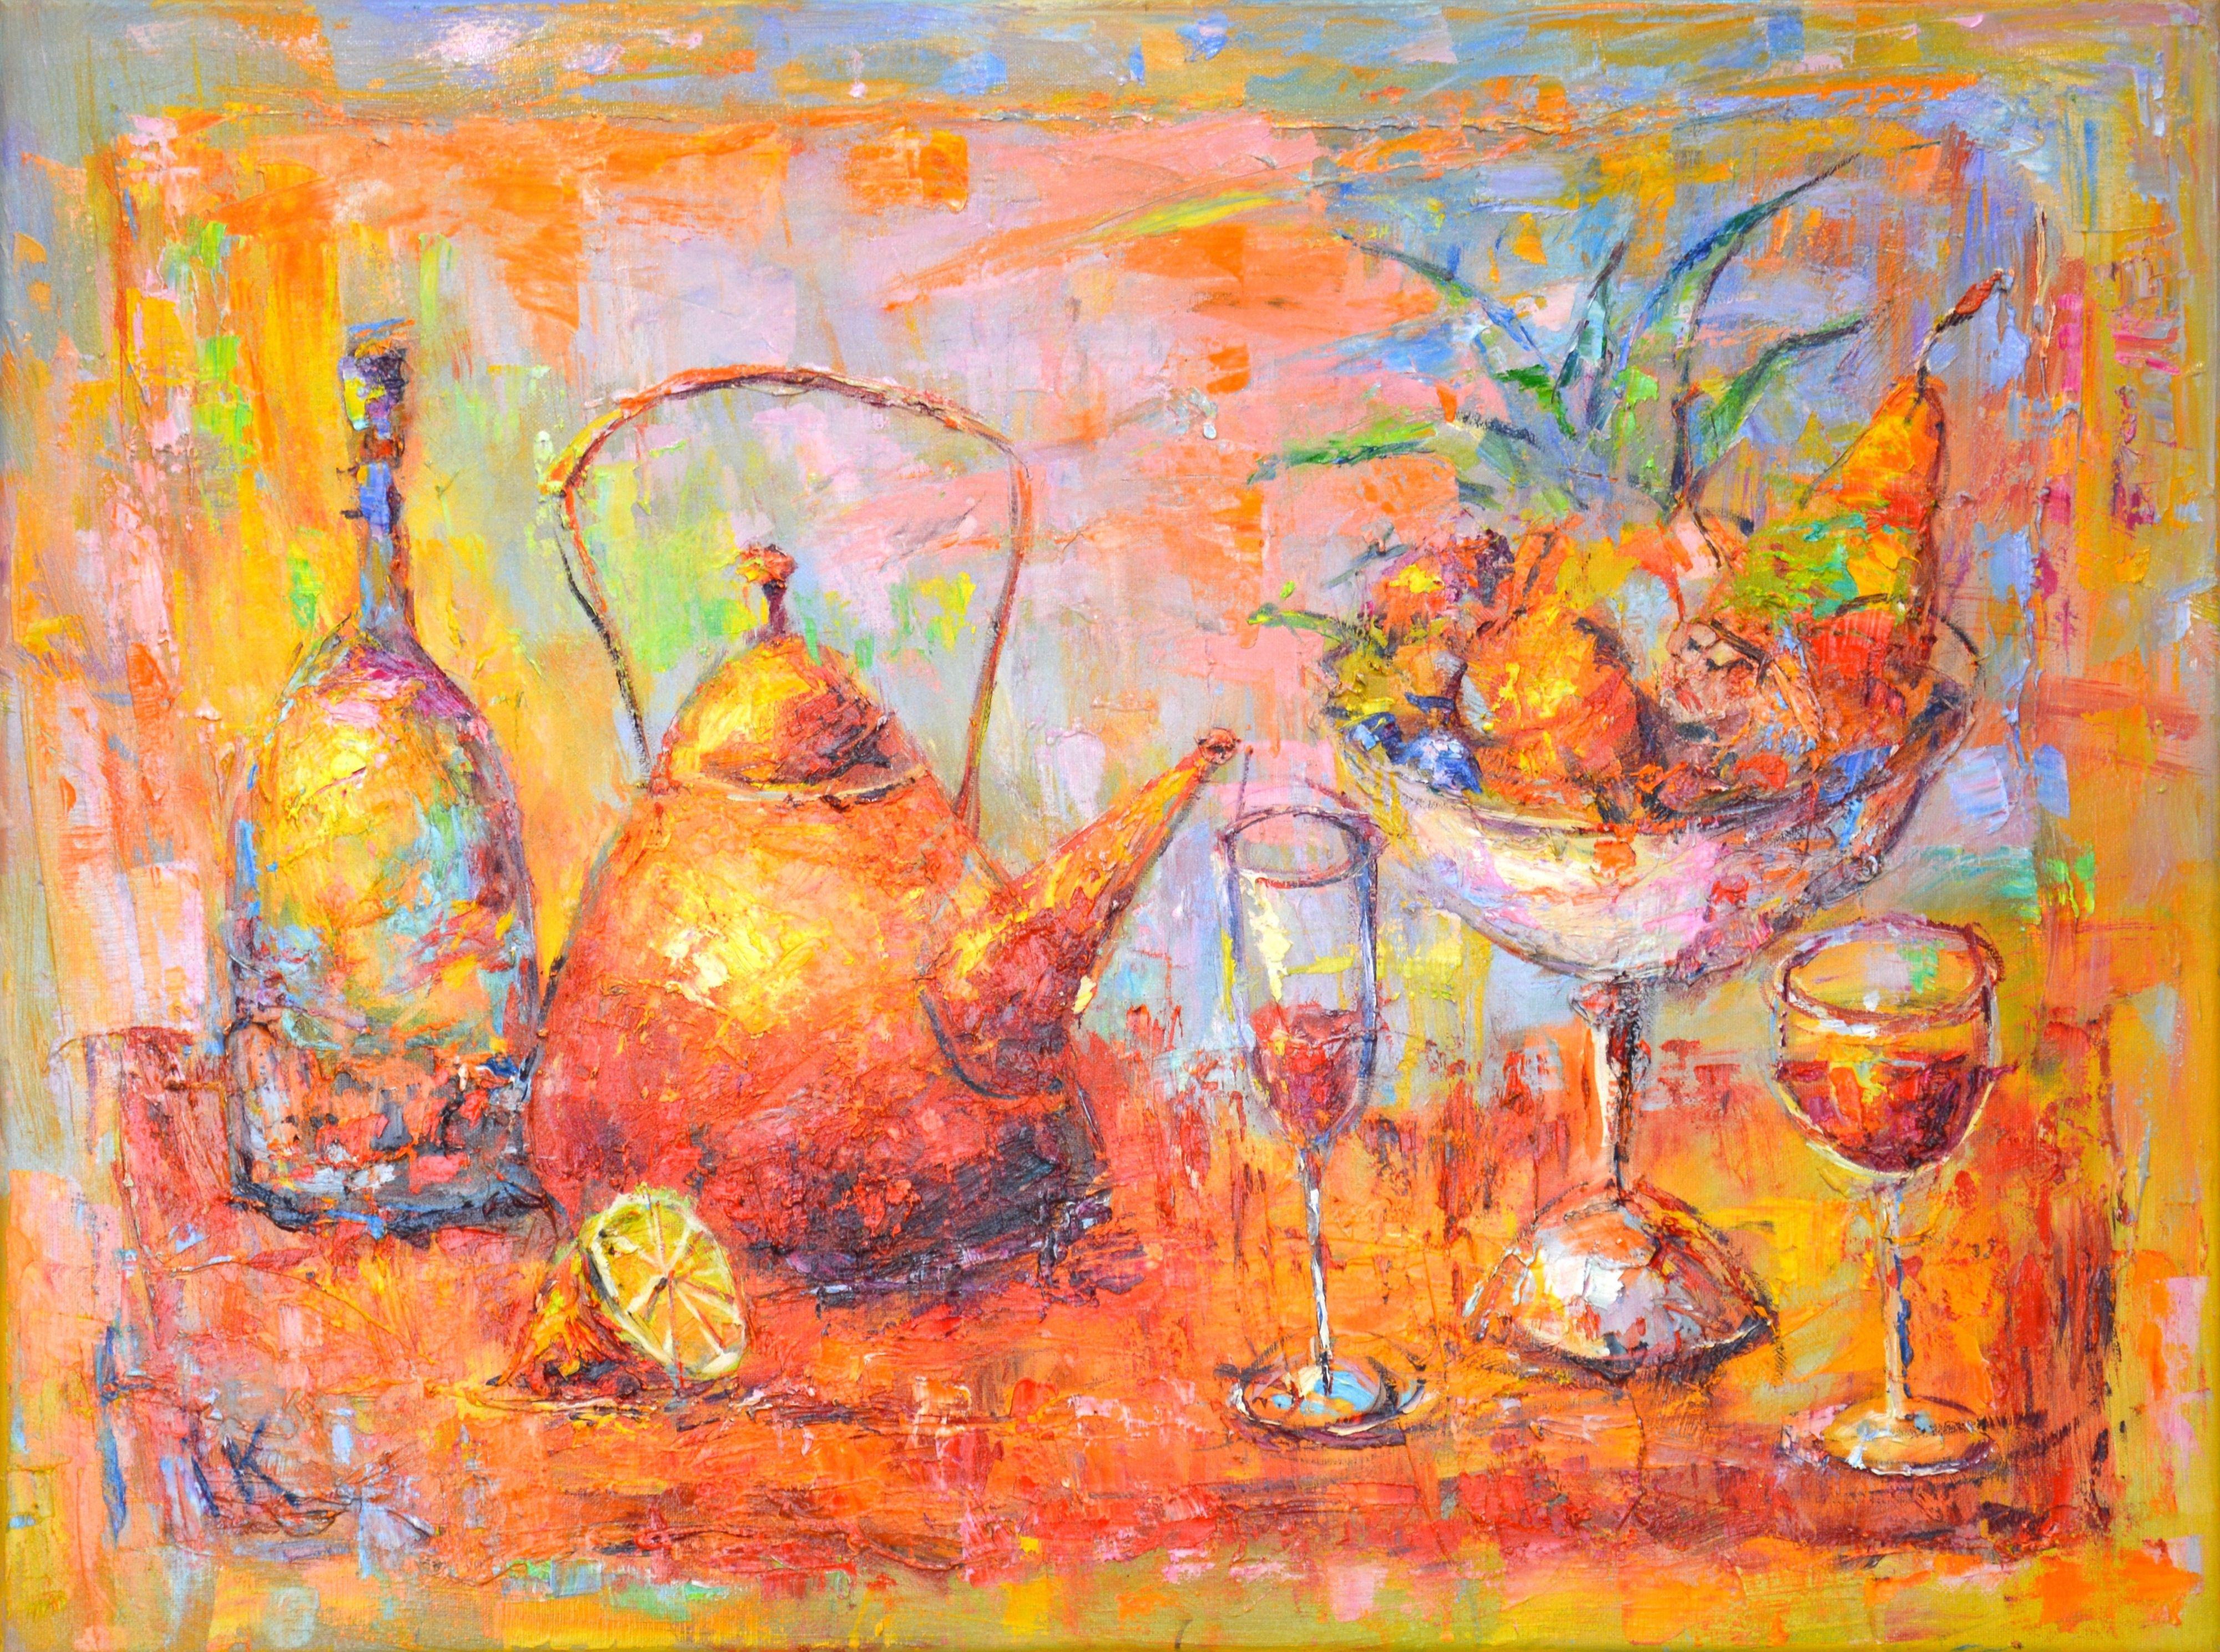 Fruit still life. Teapot, bottle of wine, glasses, fruits in a vase on a bright abstract background. The painting was painted expressively with a spatula. Modern. Expressionism.  Part of an ongoing series of vibrant decorative still lifes. The